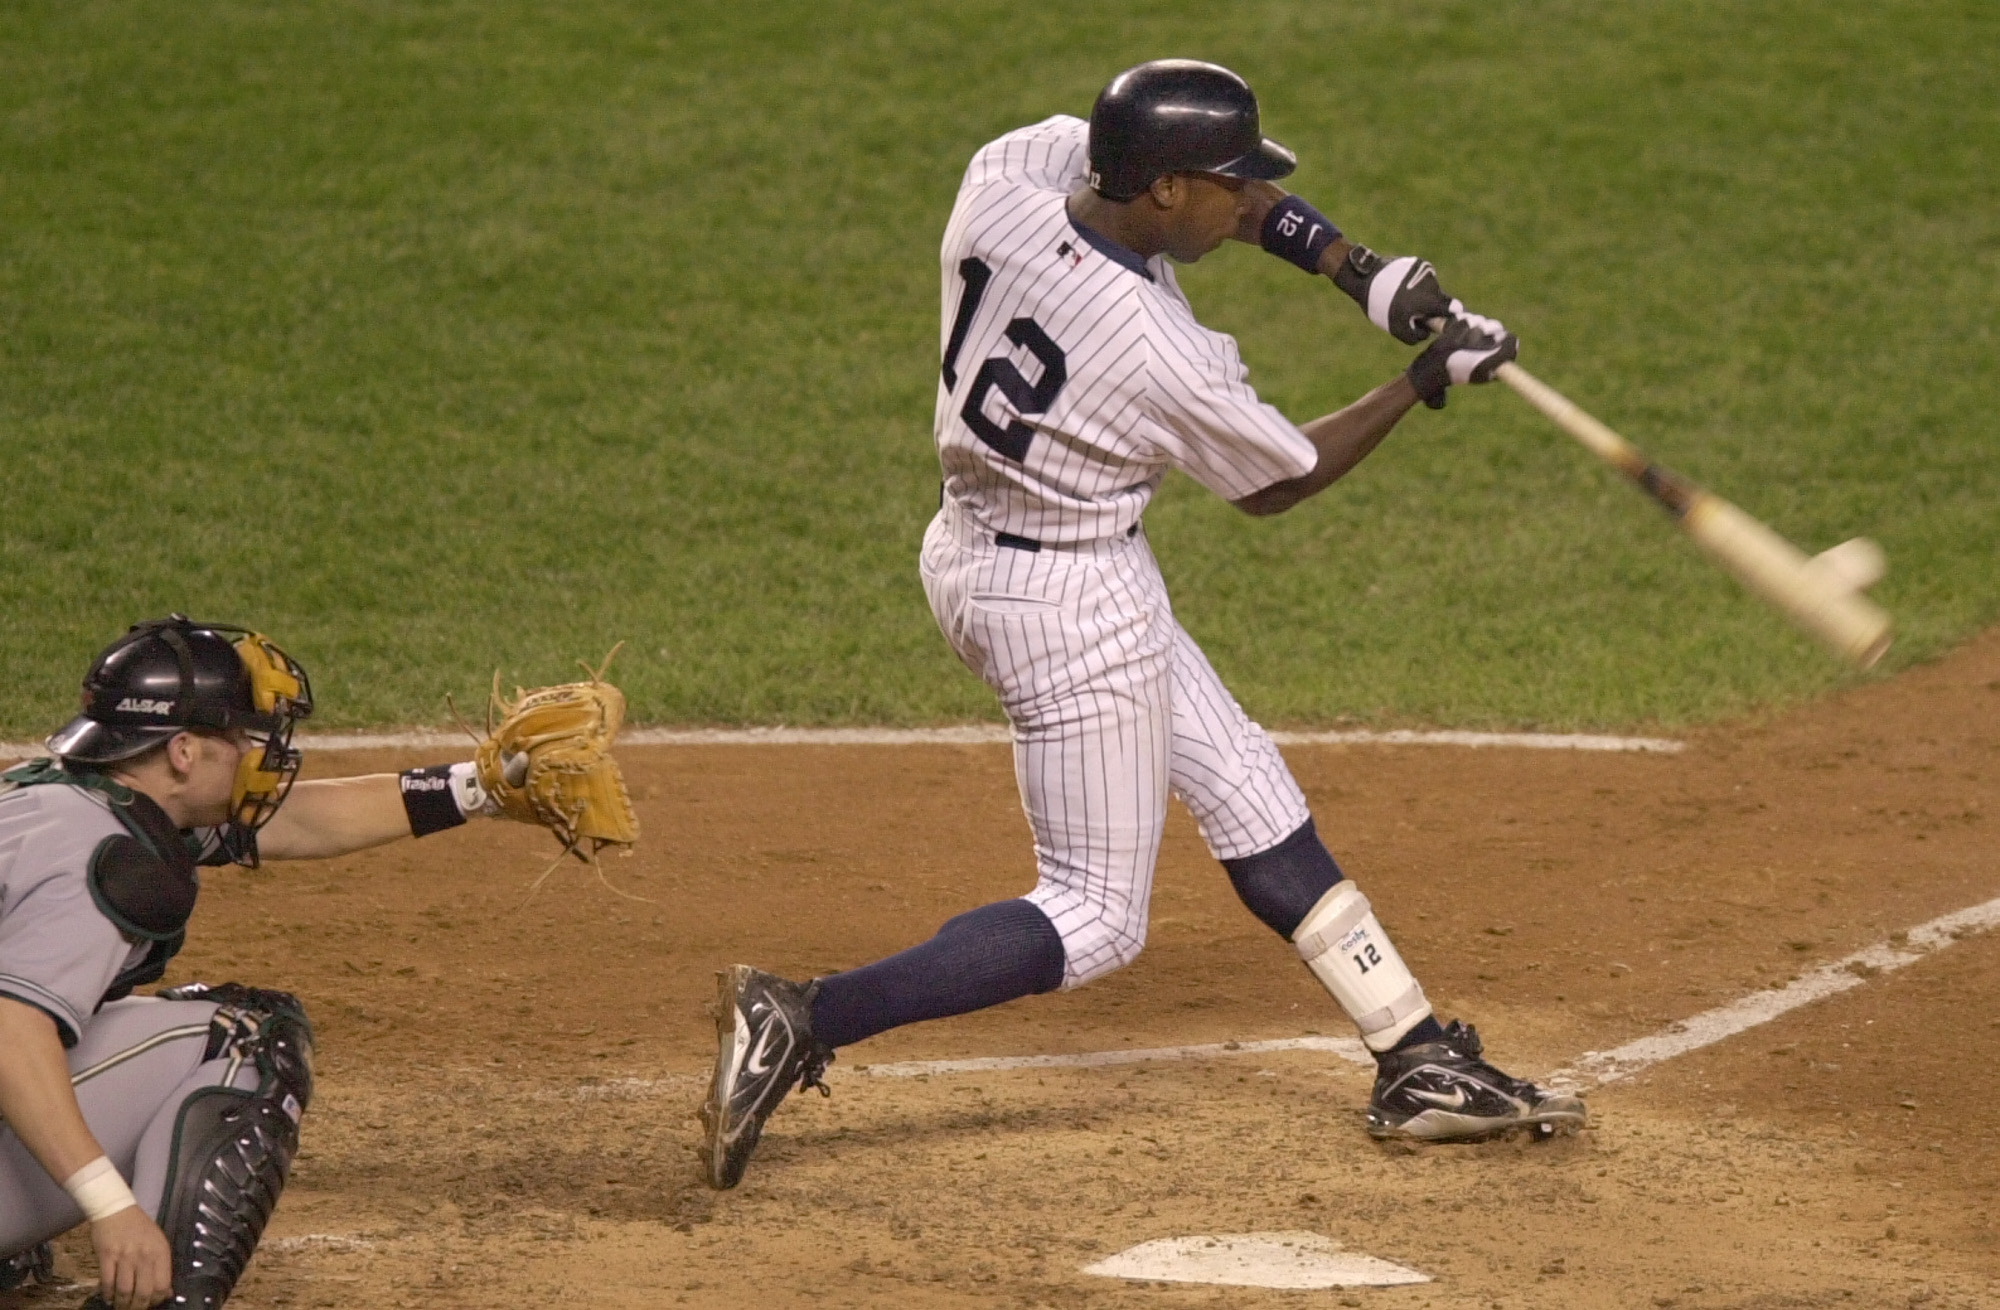 THIS DAY IN BÉISBOL August 17: Alfonso Soriano is first second